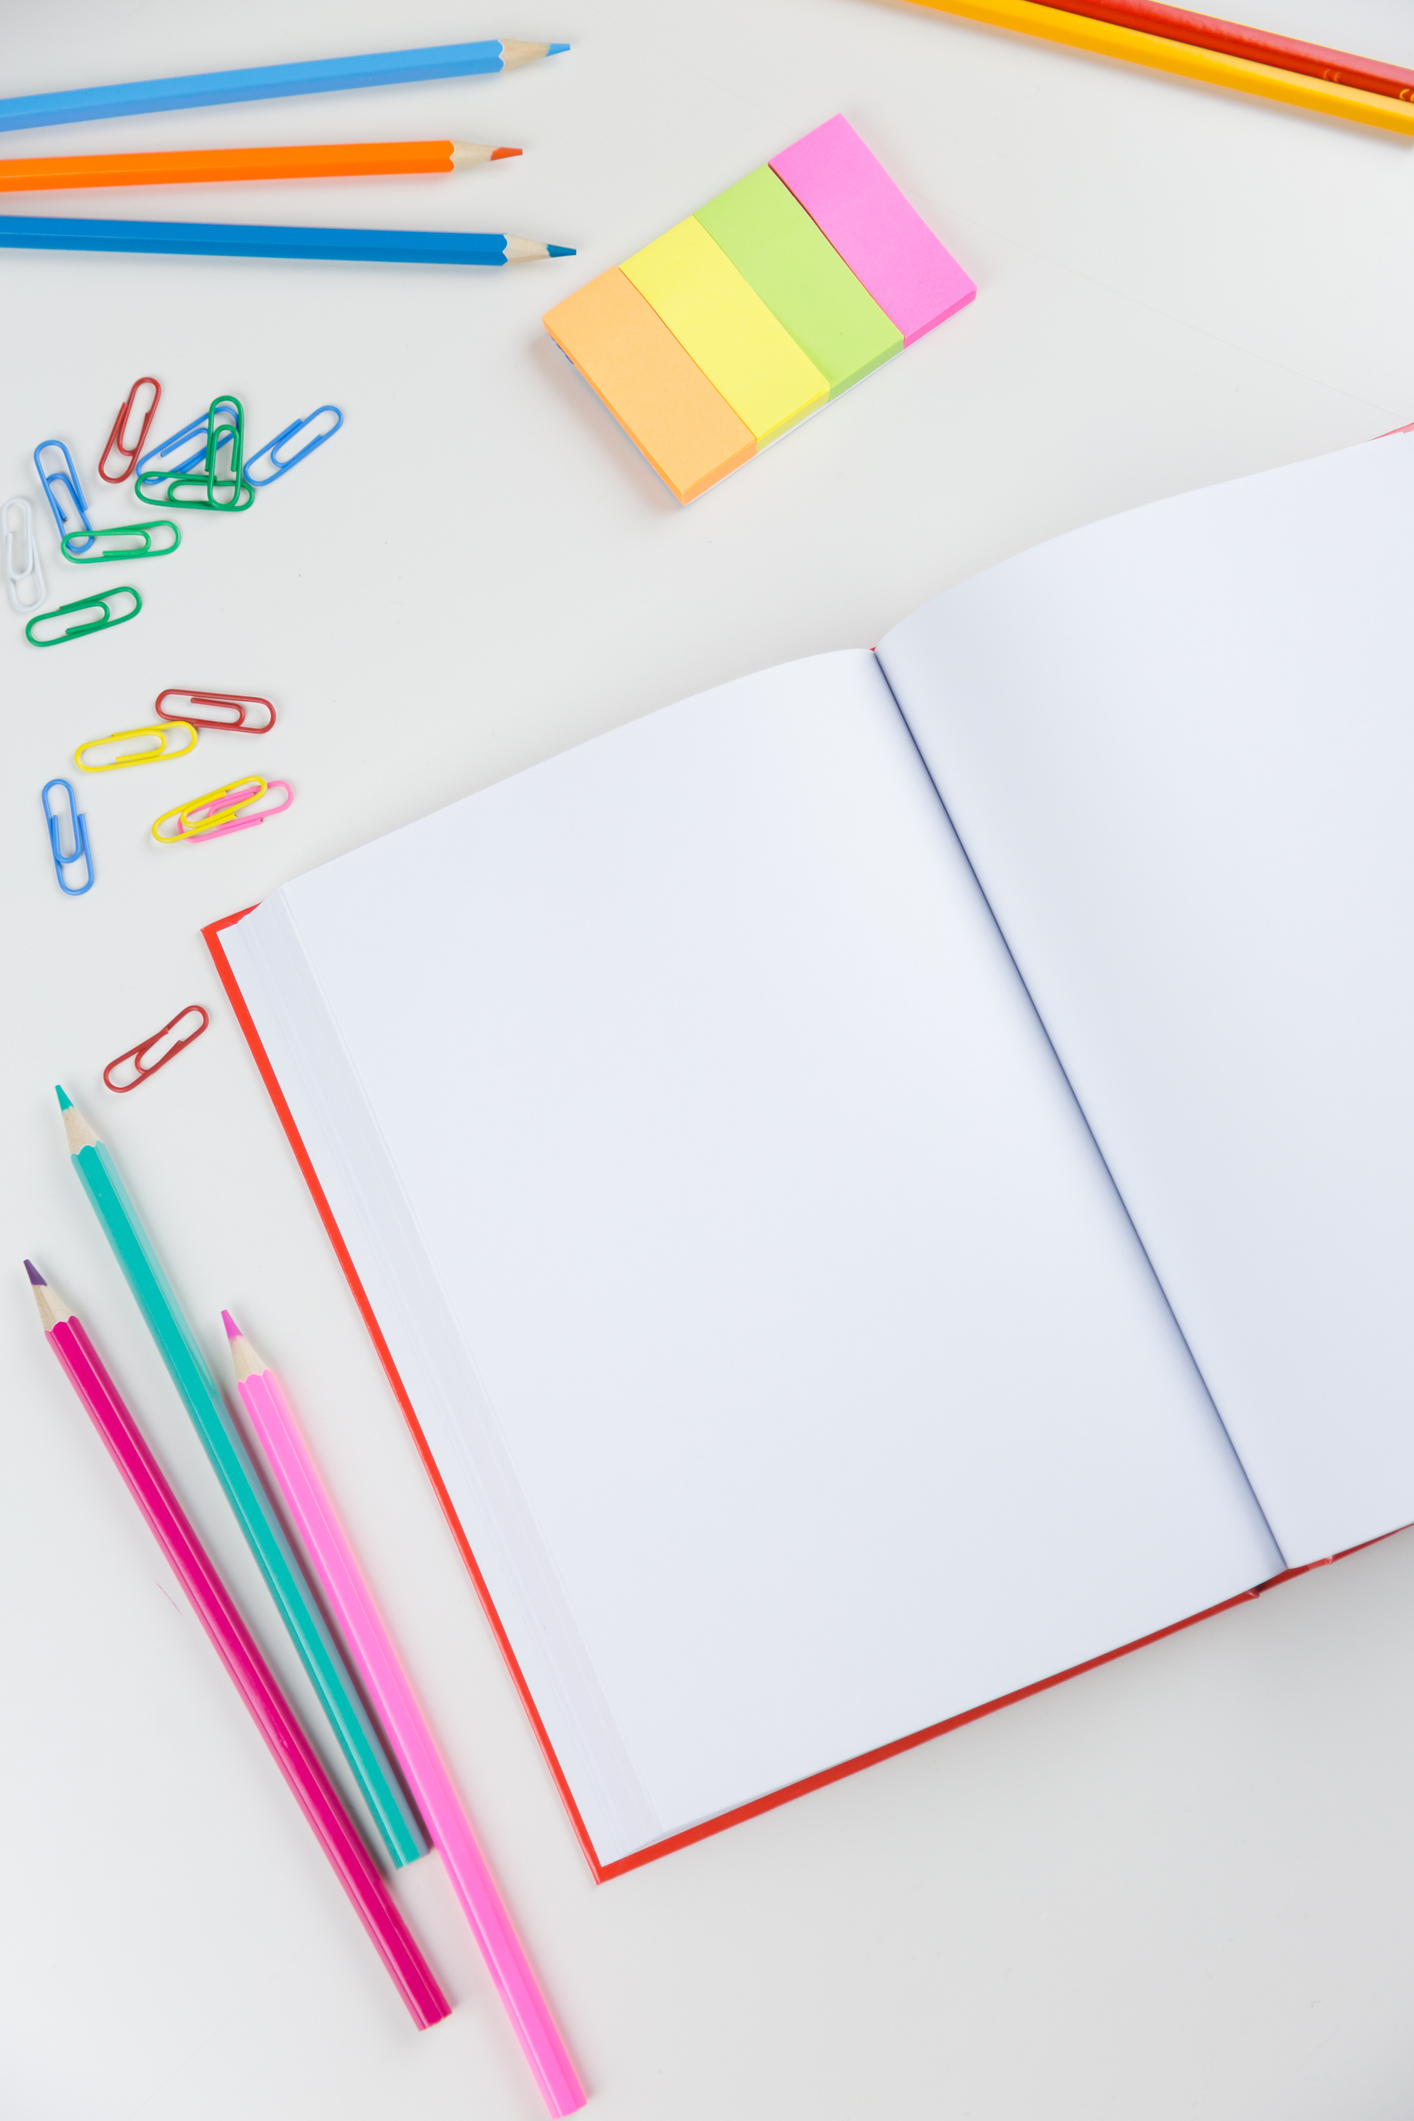 High Angle View Of Book With Colored Pencils And Paper Clips On White Background